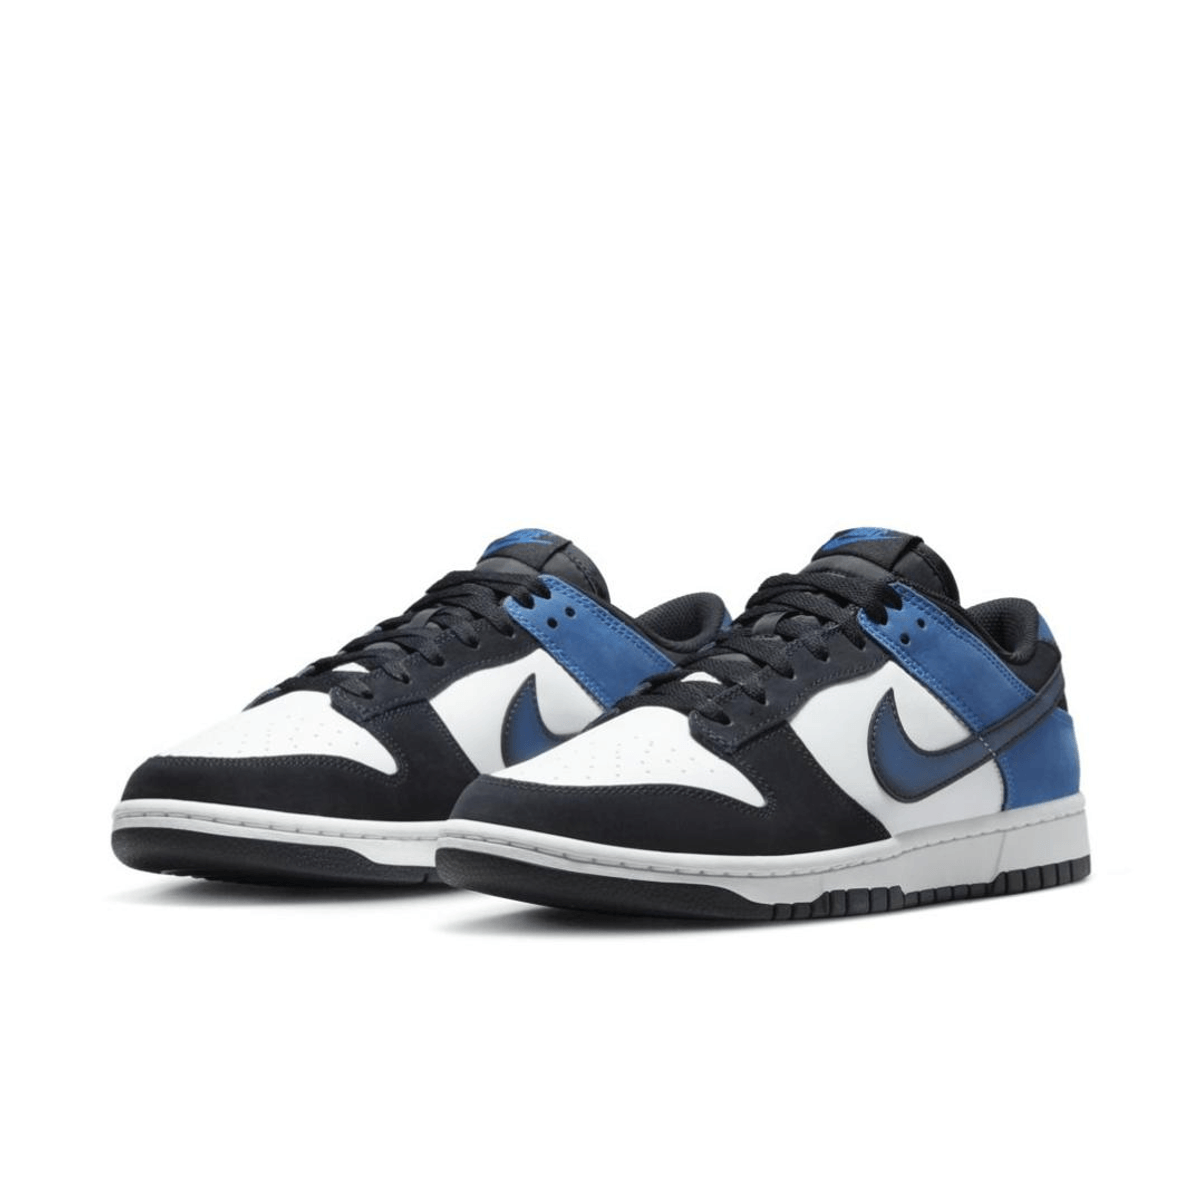 The Nike Dunk Low Industrial Blue Is The Latest Addition To The Nike Dunk Army